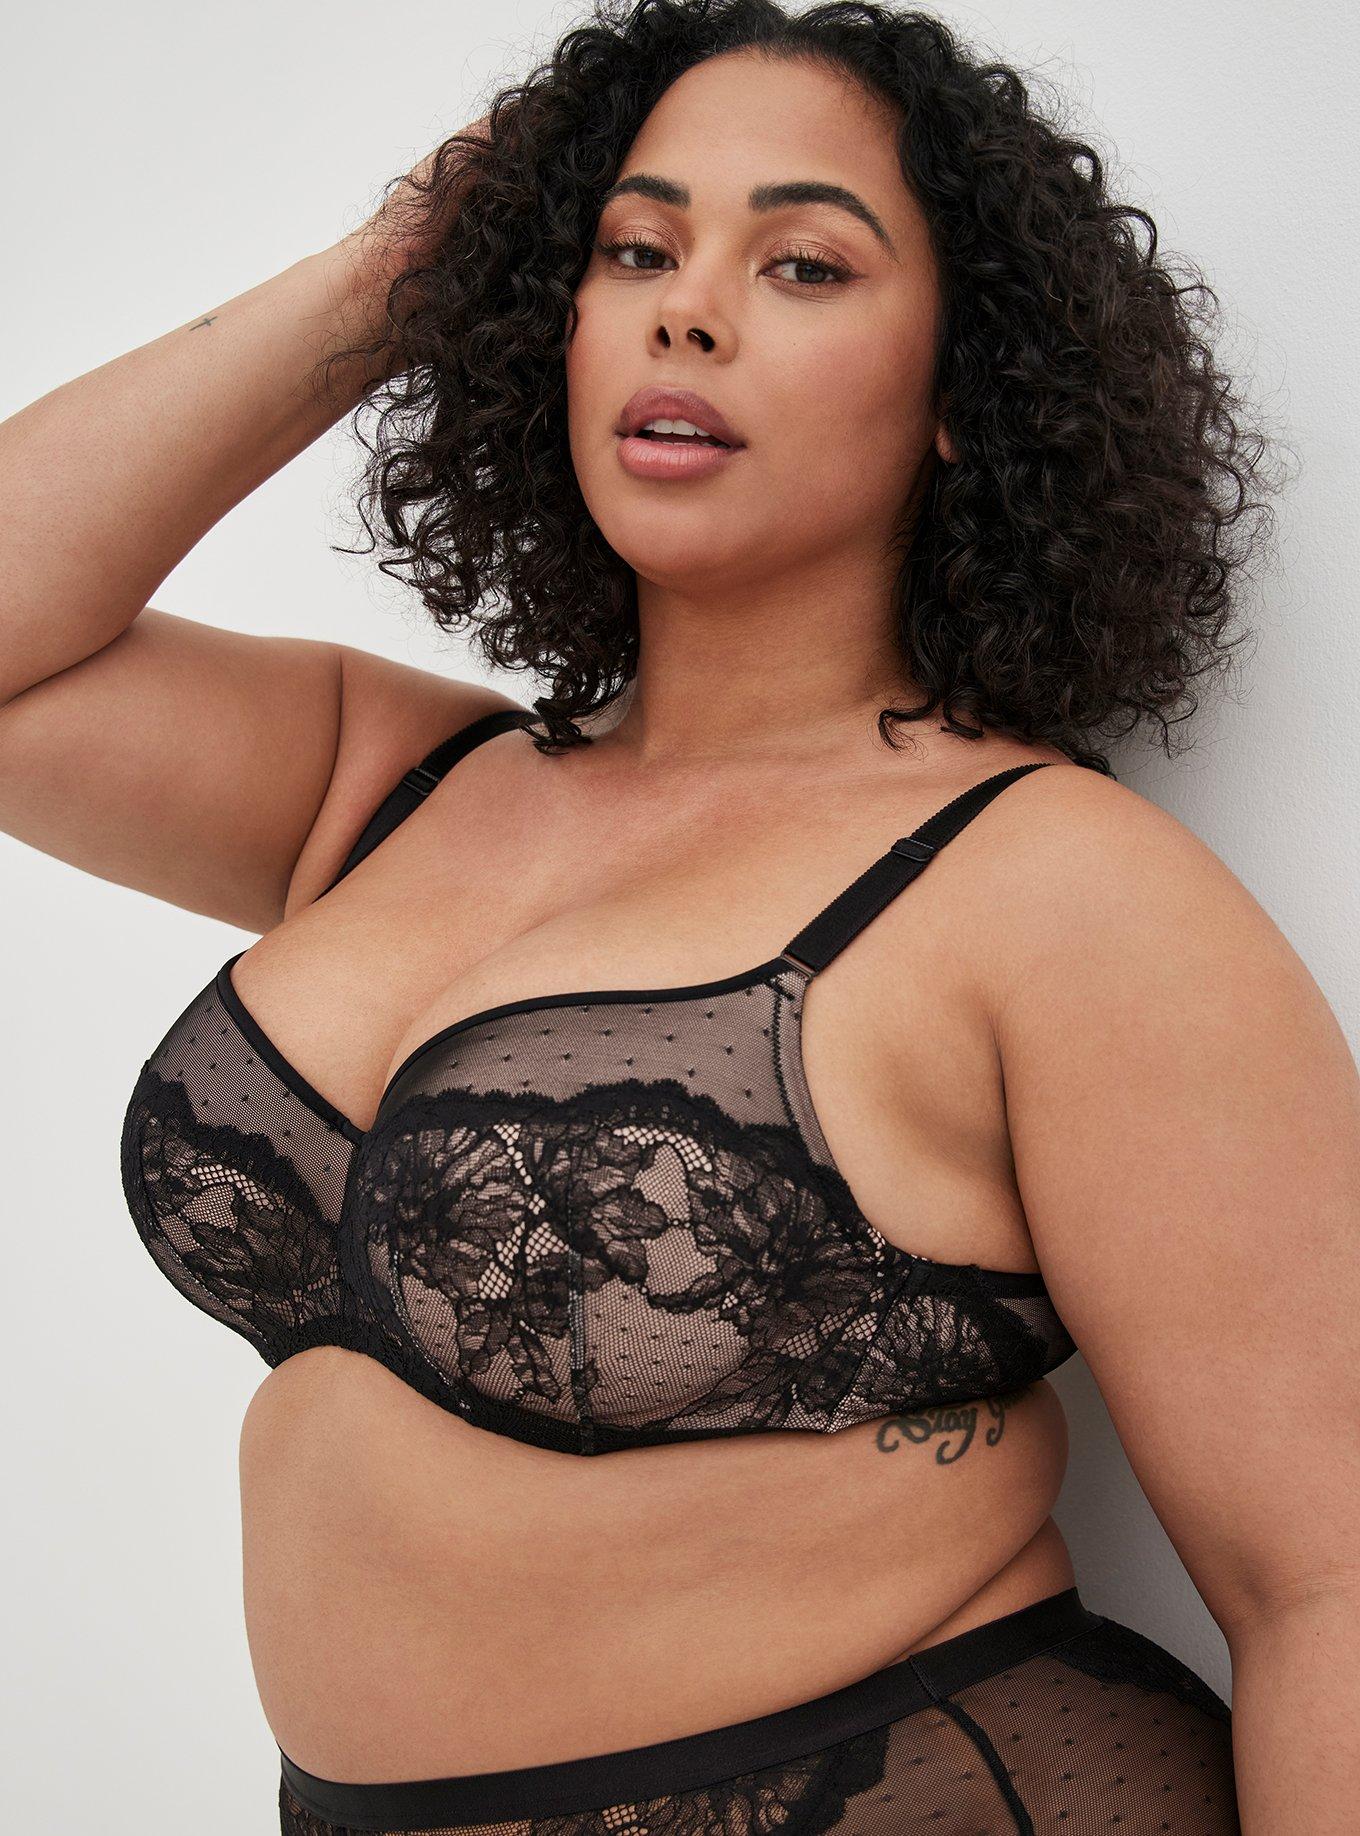 Vs Lace Full Coverage Back Smoothing Bra